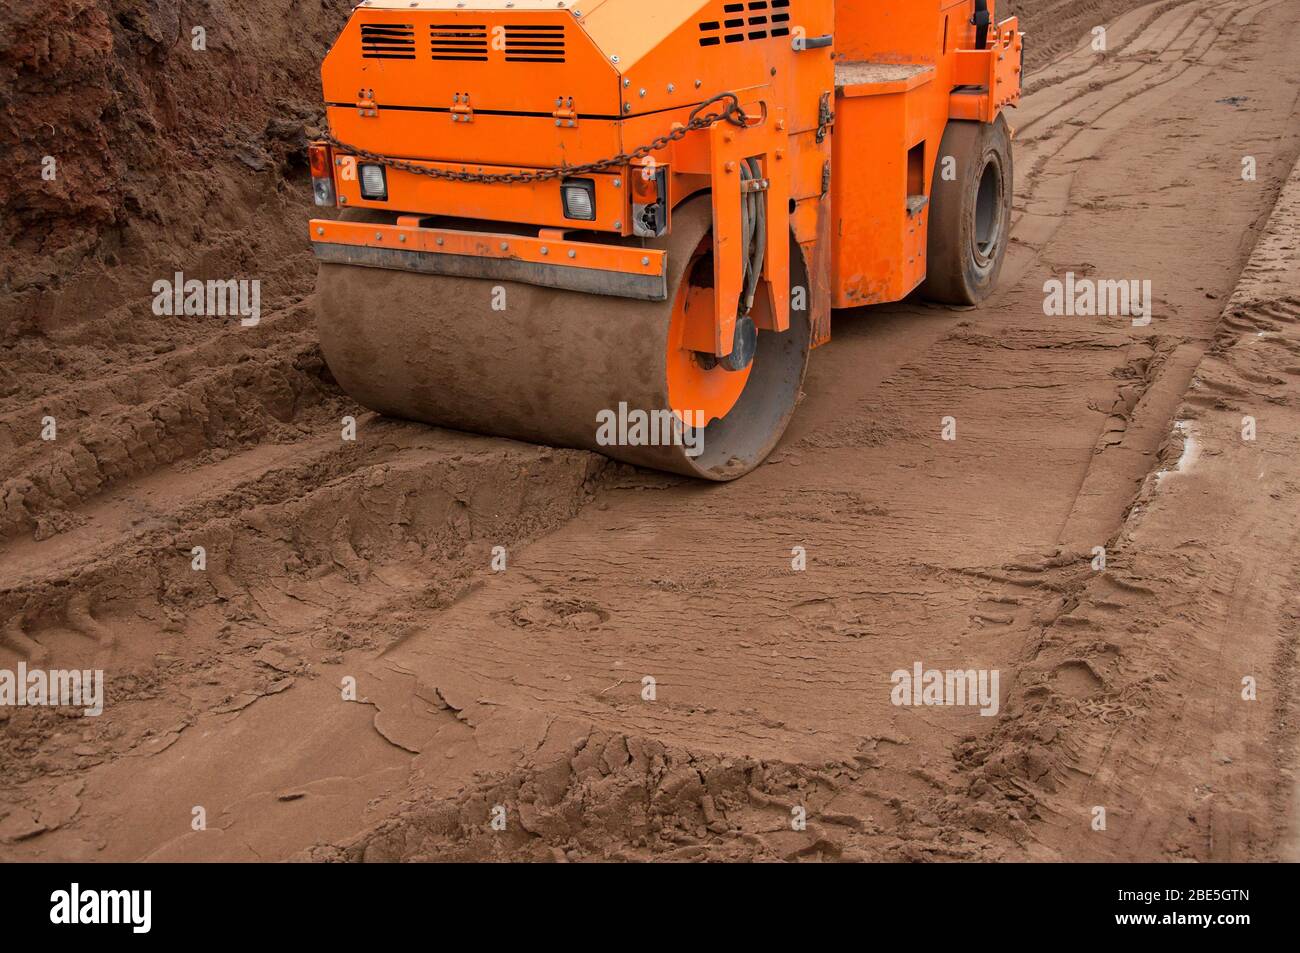 A small road roller rolls soil for a new road. Construction machinery at work. Road construction equipment Stock Photo